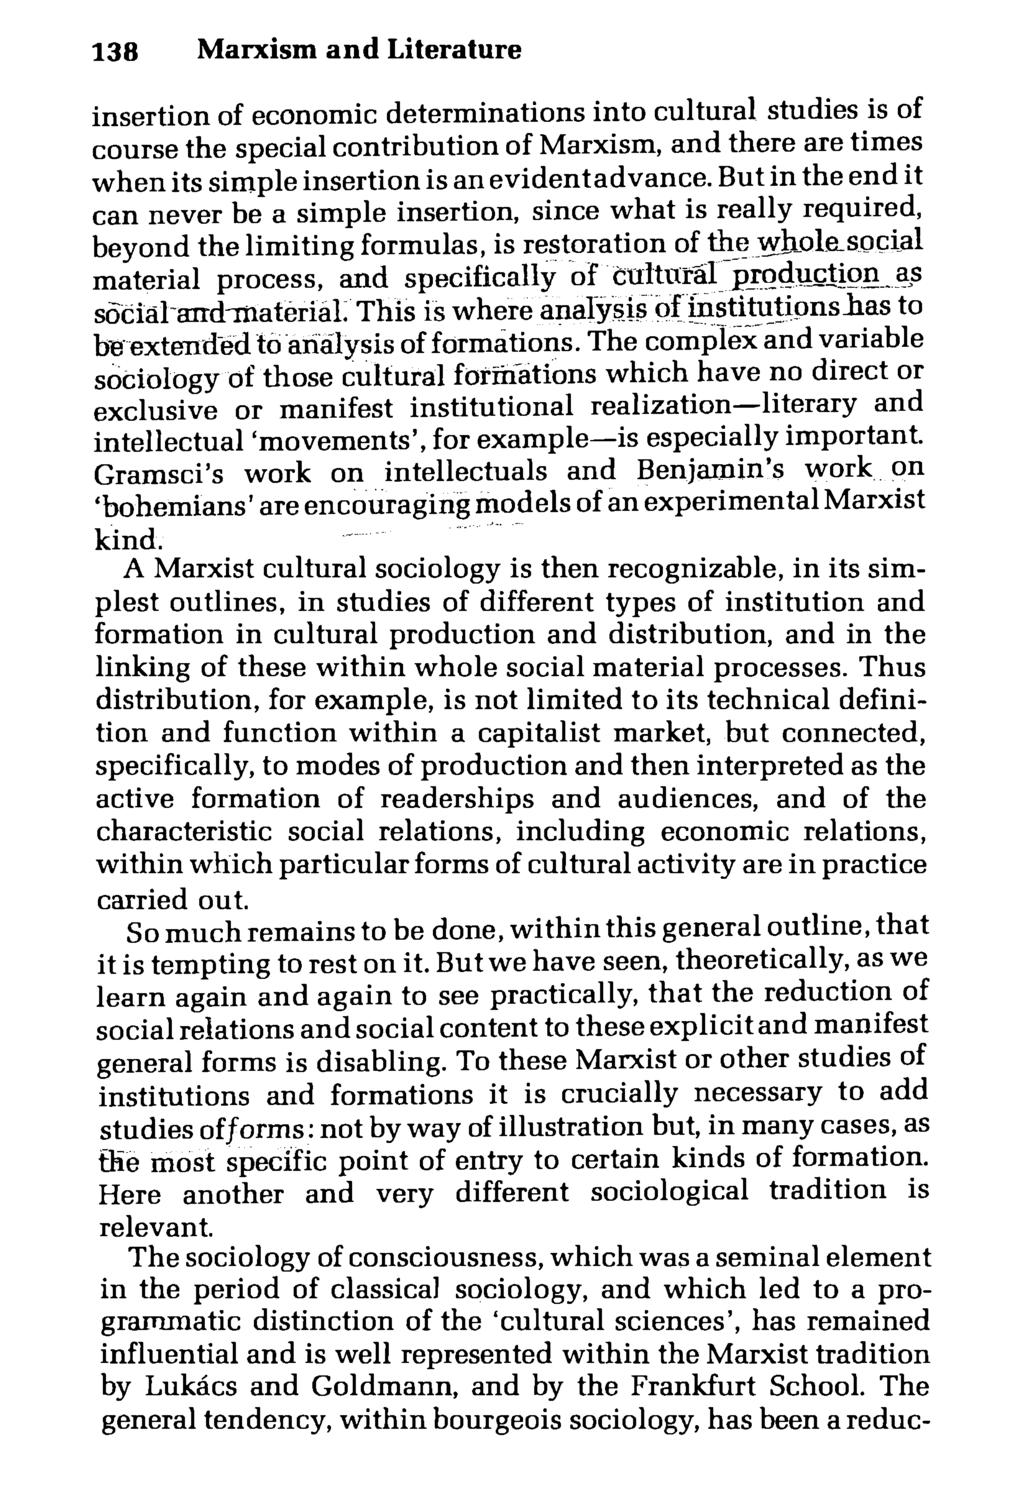 138 Marxism and Literature insertion of economic determinations into cultural studies is of course the special contribution of Marxism, and there are times when its simple insertion is an